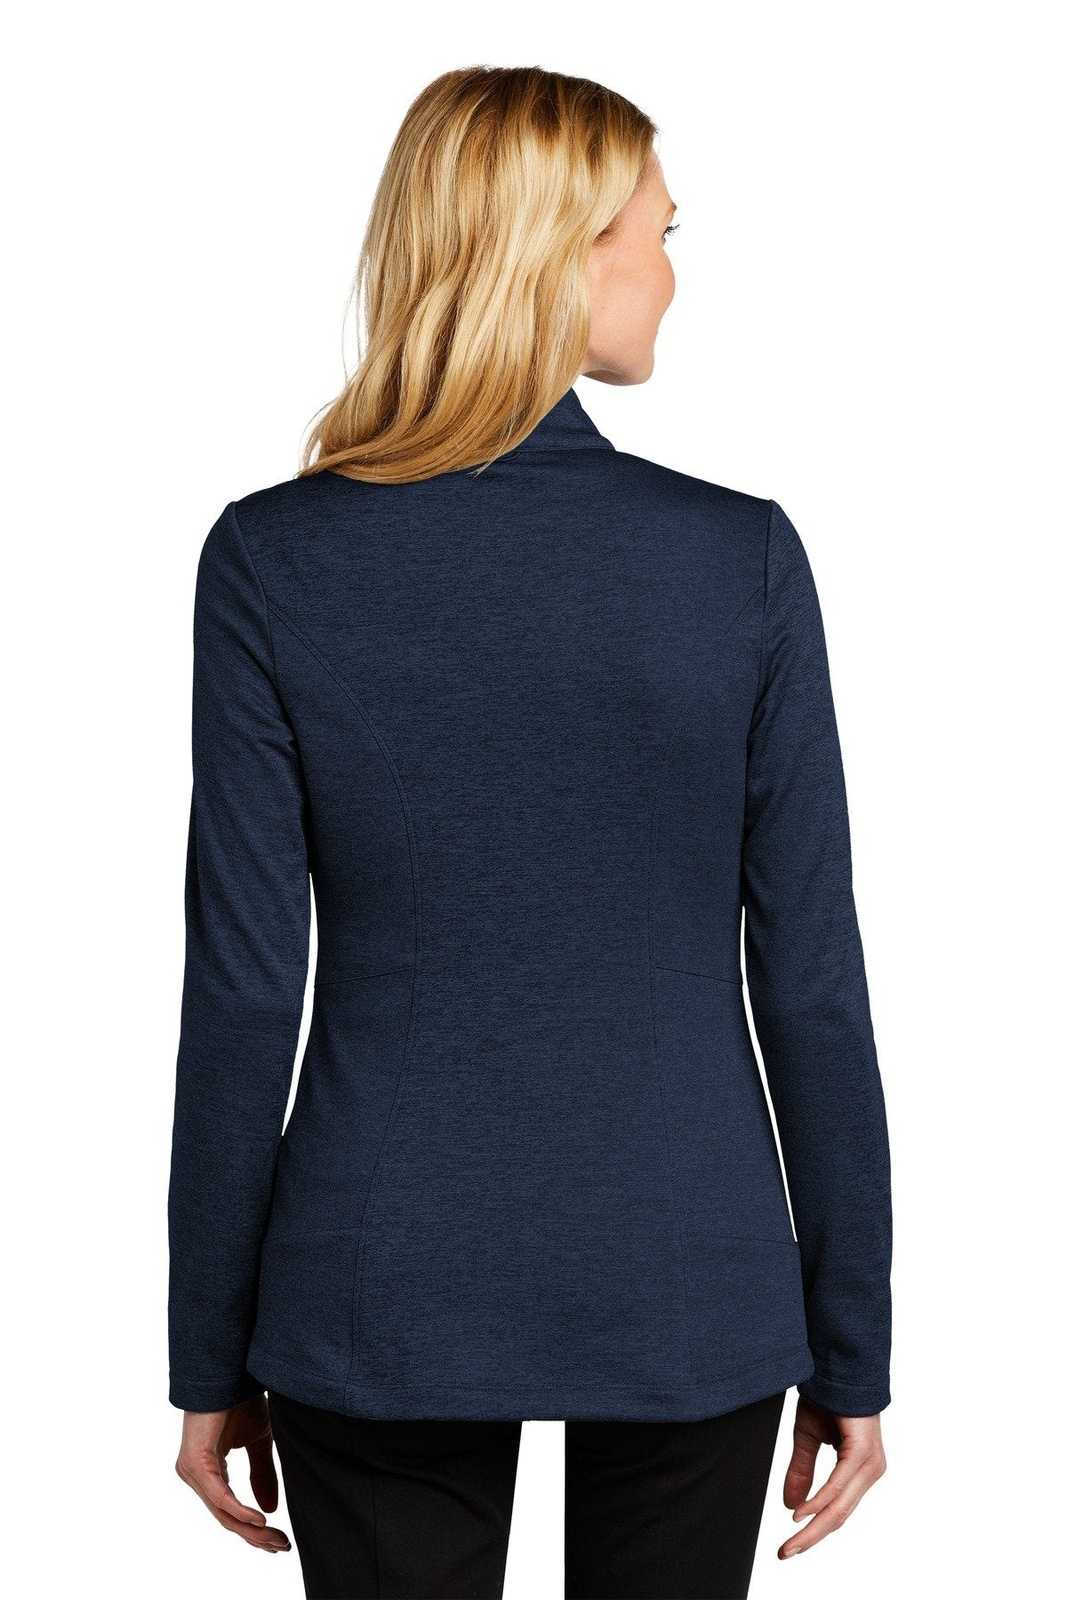 Port Authority L905 Ladies Collective Striated Fleece Jacket - River Blue Navy Heather - HIT a Double - 2